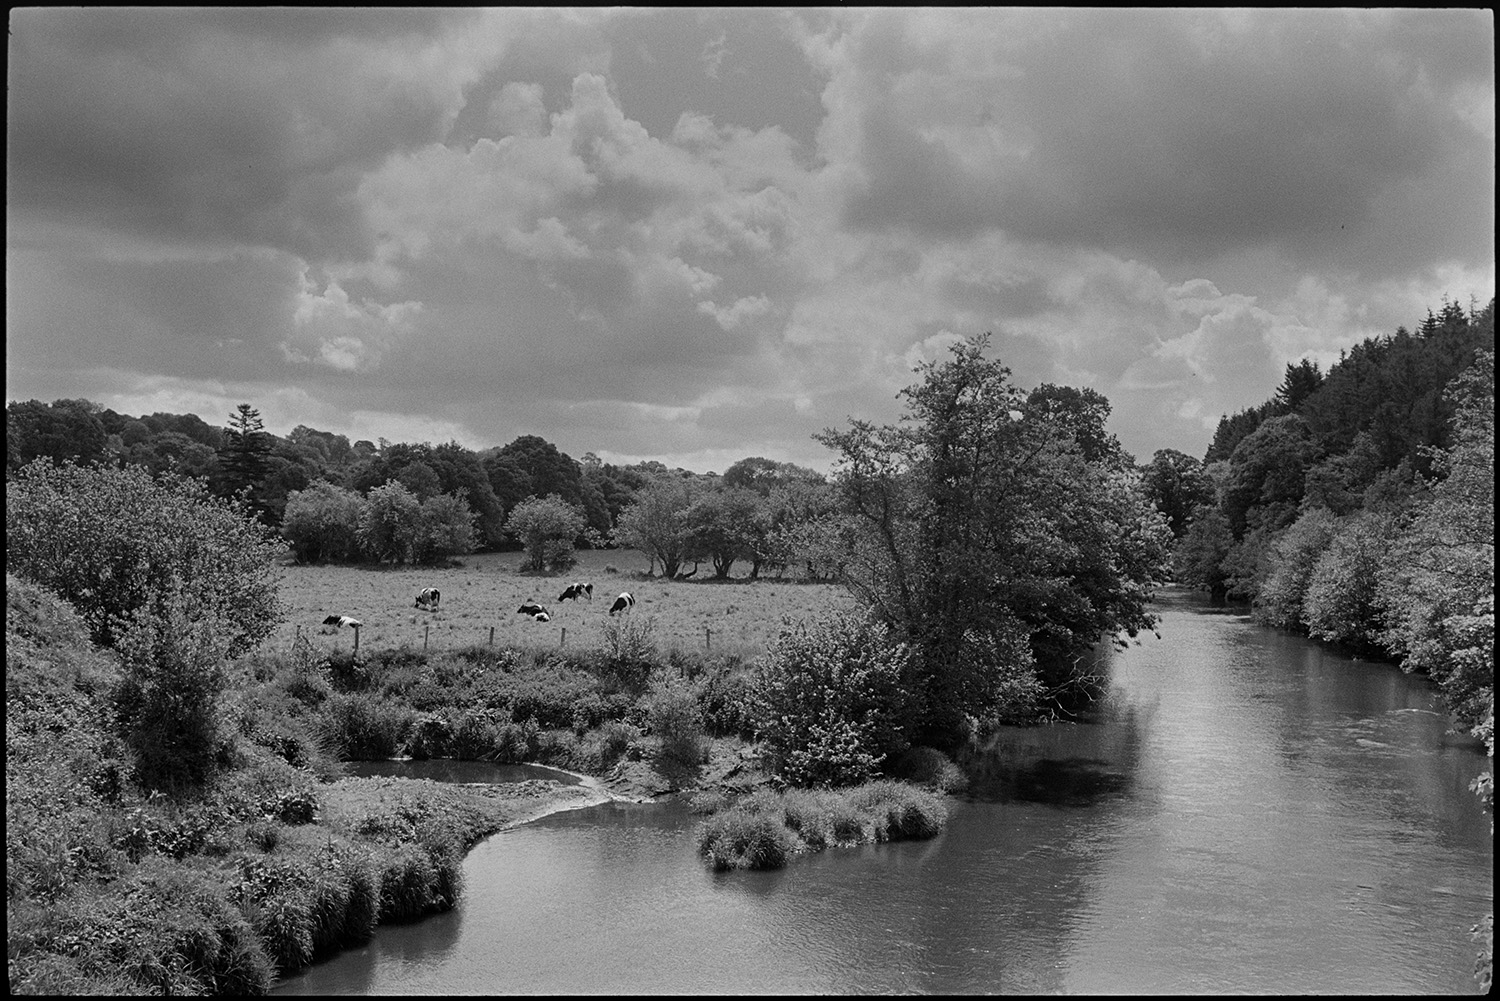 River scene with eroded bank quarry.
[The River Torridge in a wooded valley at Newbridge, near Dolton. An eroded river bank is visible with cows grazing in a field in the background and a stormy sky above.]